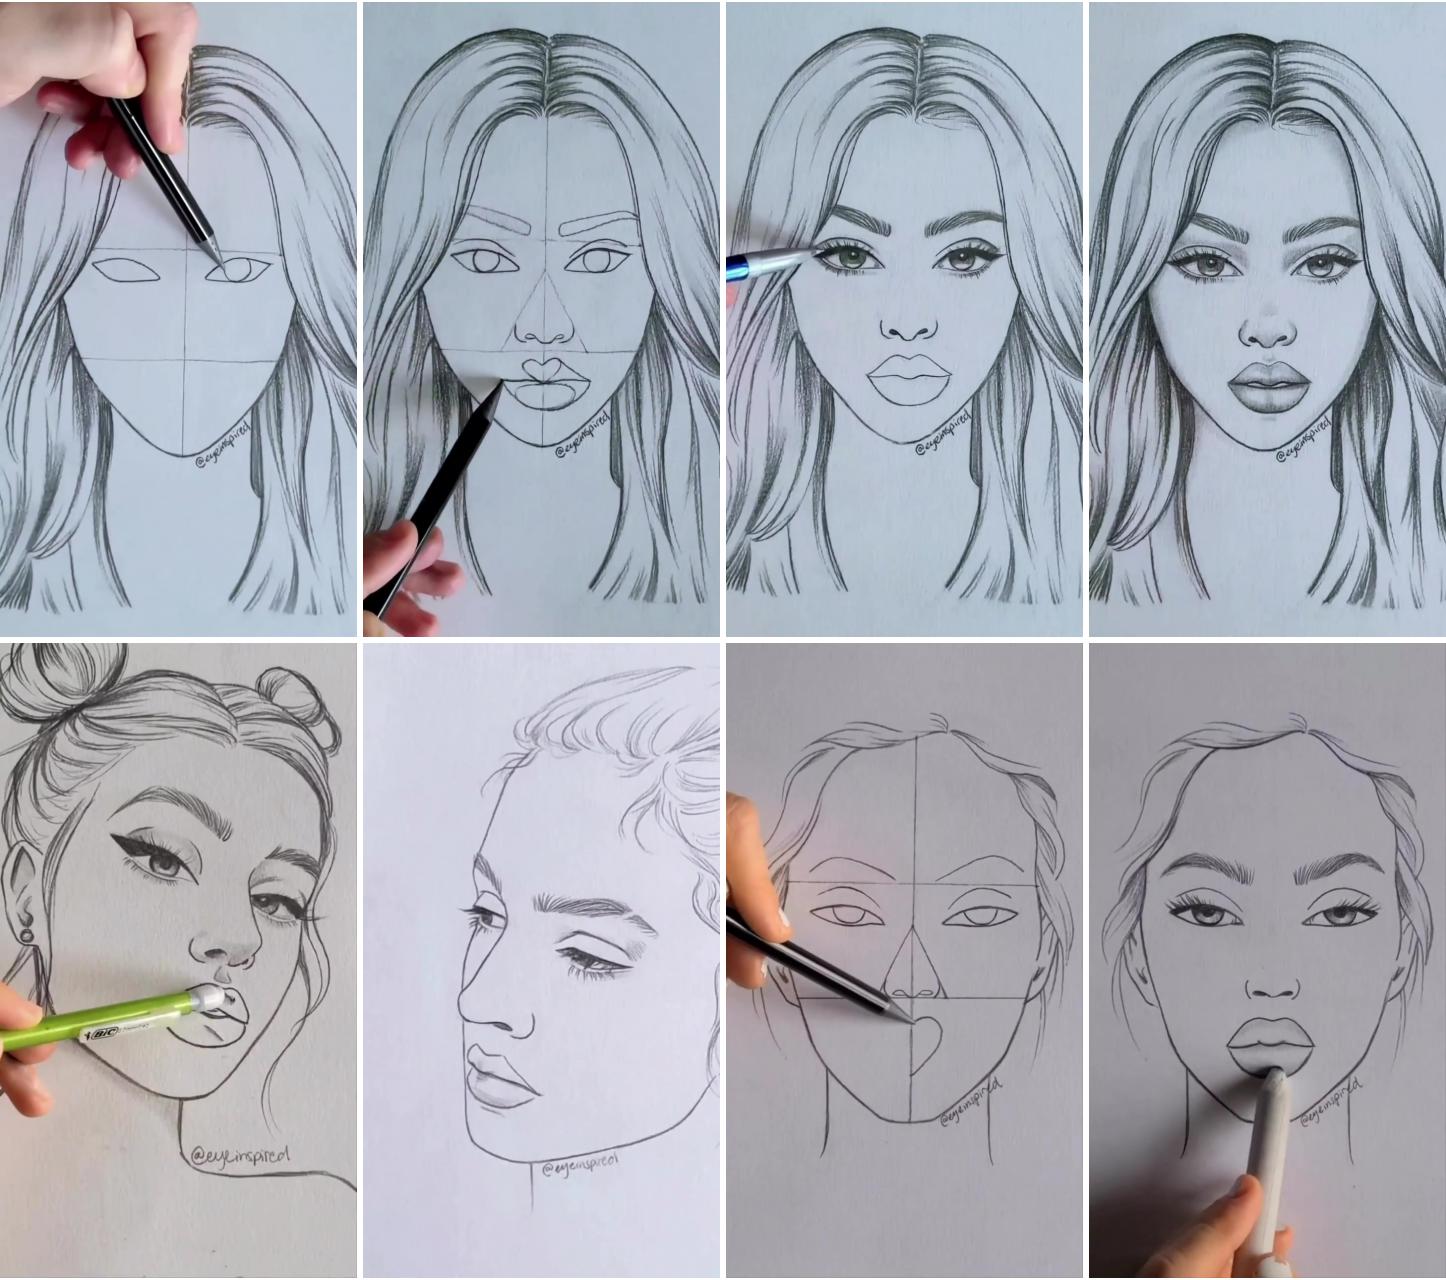 Must like due to the effort of my sketch | drawing tips helpful